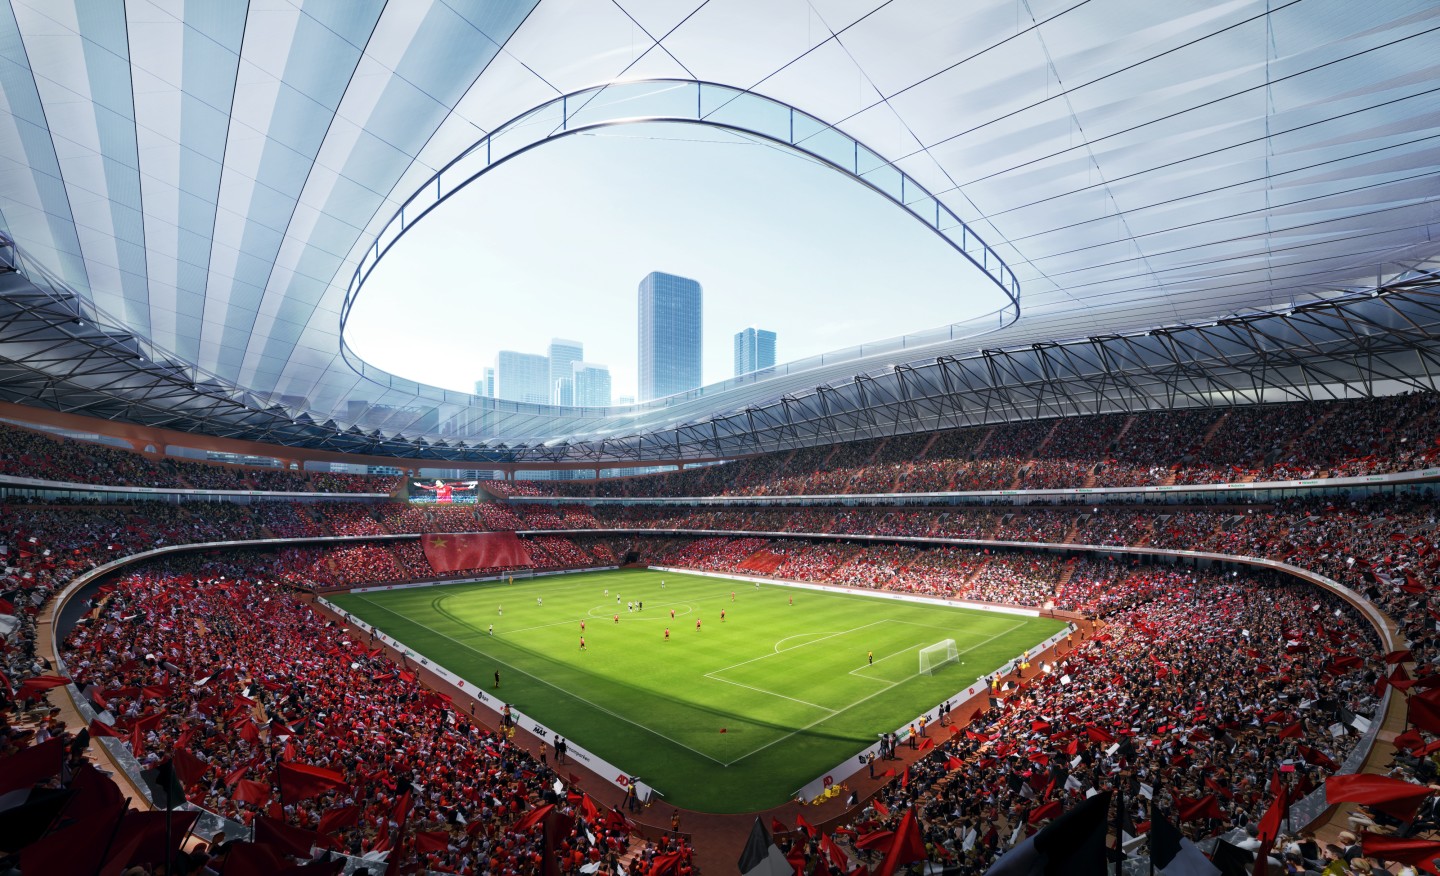 The Xi’an International Football Centre will have a total capacity of 60,000